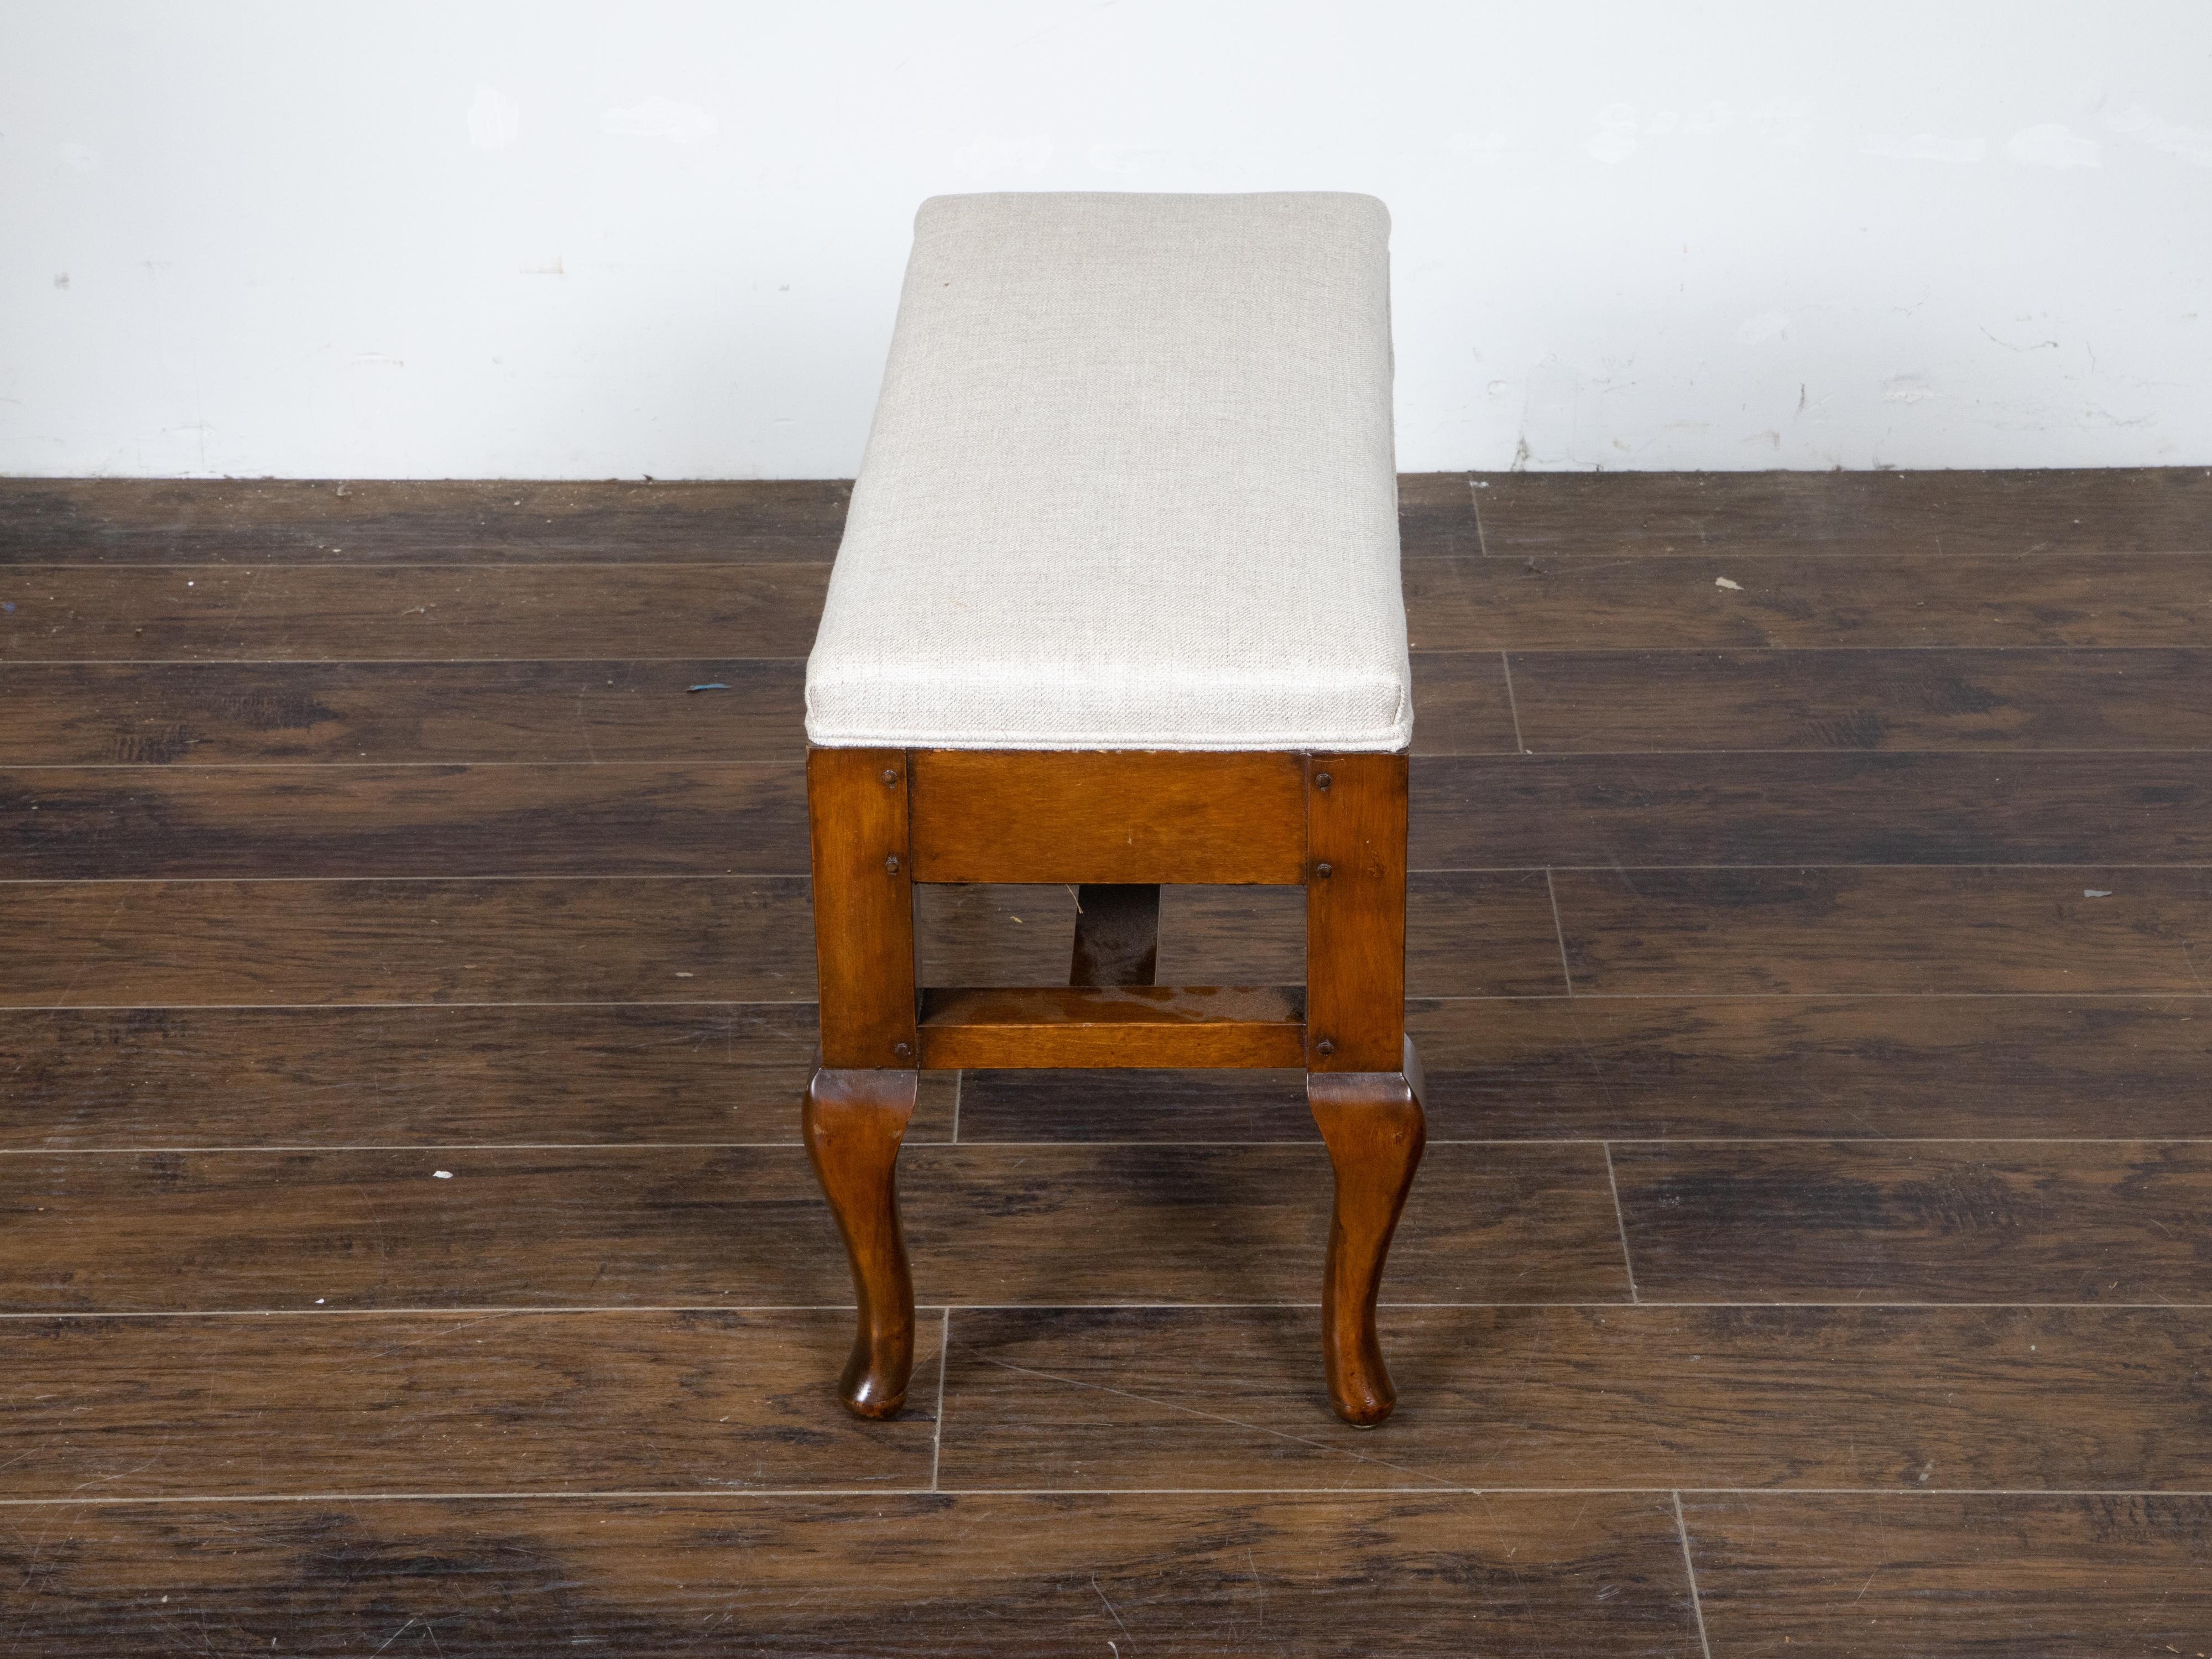 Fabric Small French 1800s Wood Bench with Curving Legs, Cross Stretcher and Upholstery